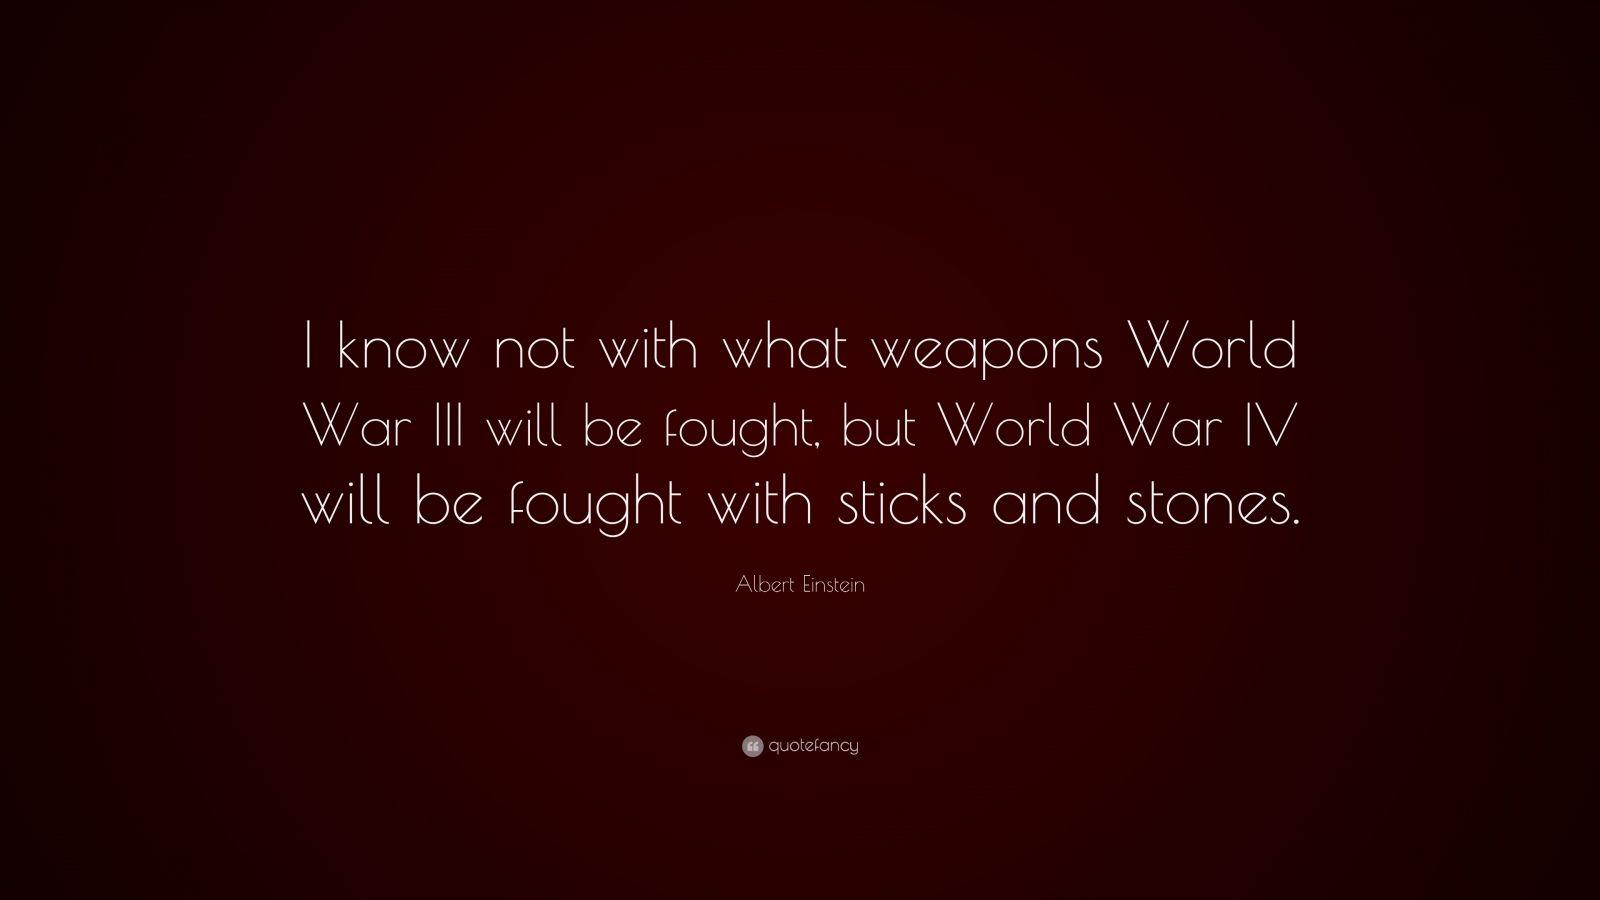 Albert Einstein Quote: “I know not with what weapons World